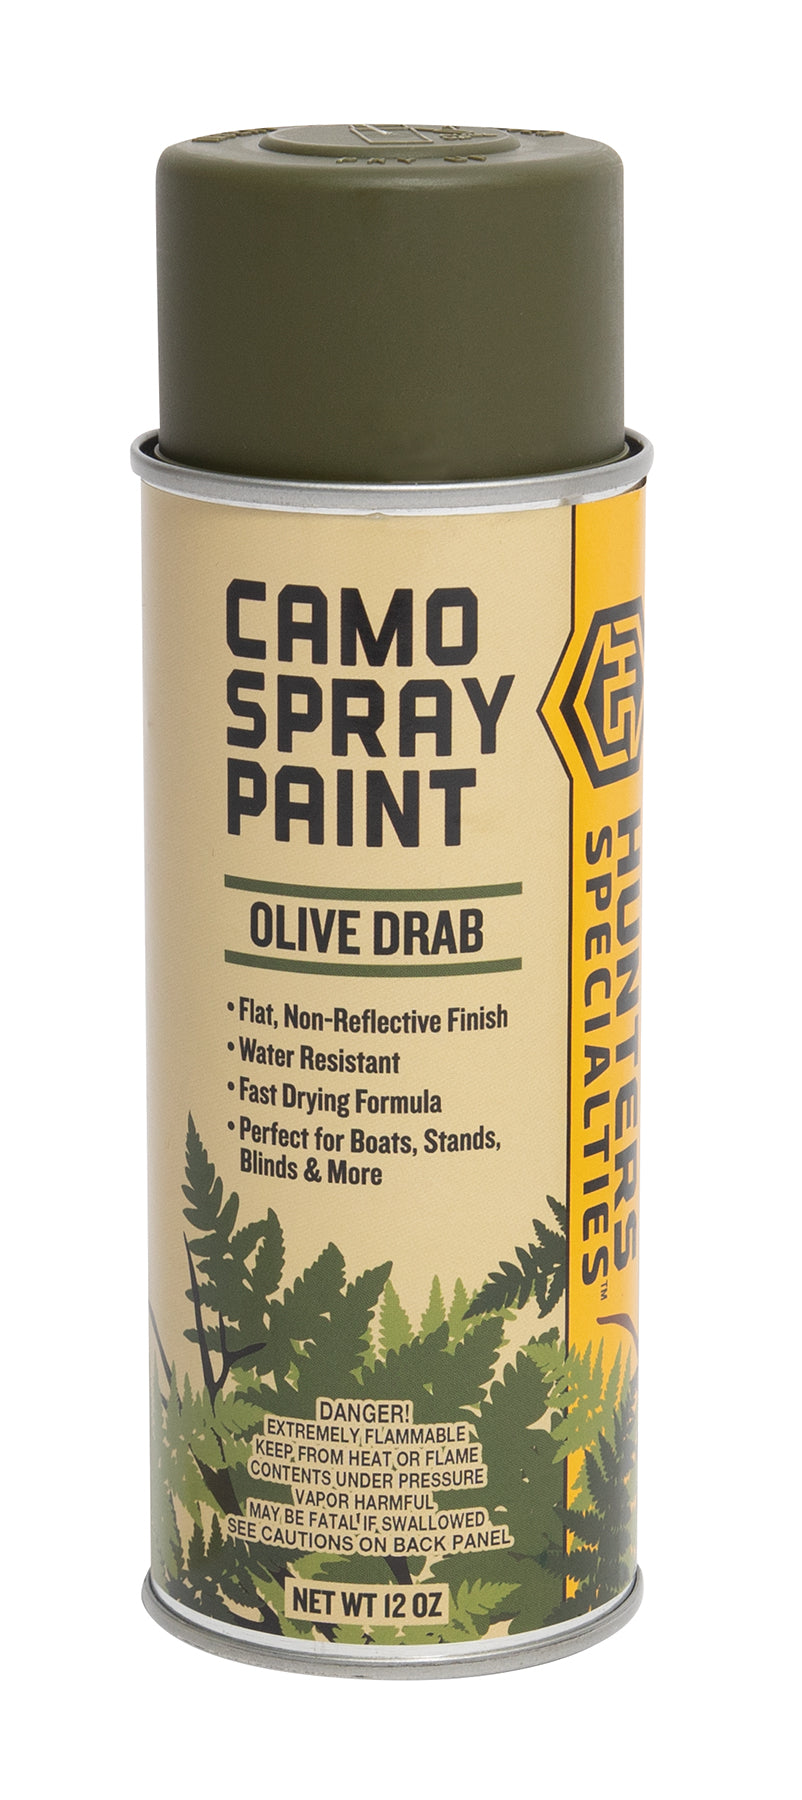 Camouflage Spray Paint 12oz - Olive Drab, (5 Per Pack) – Mil-Bar